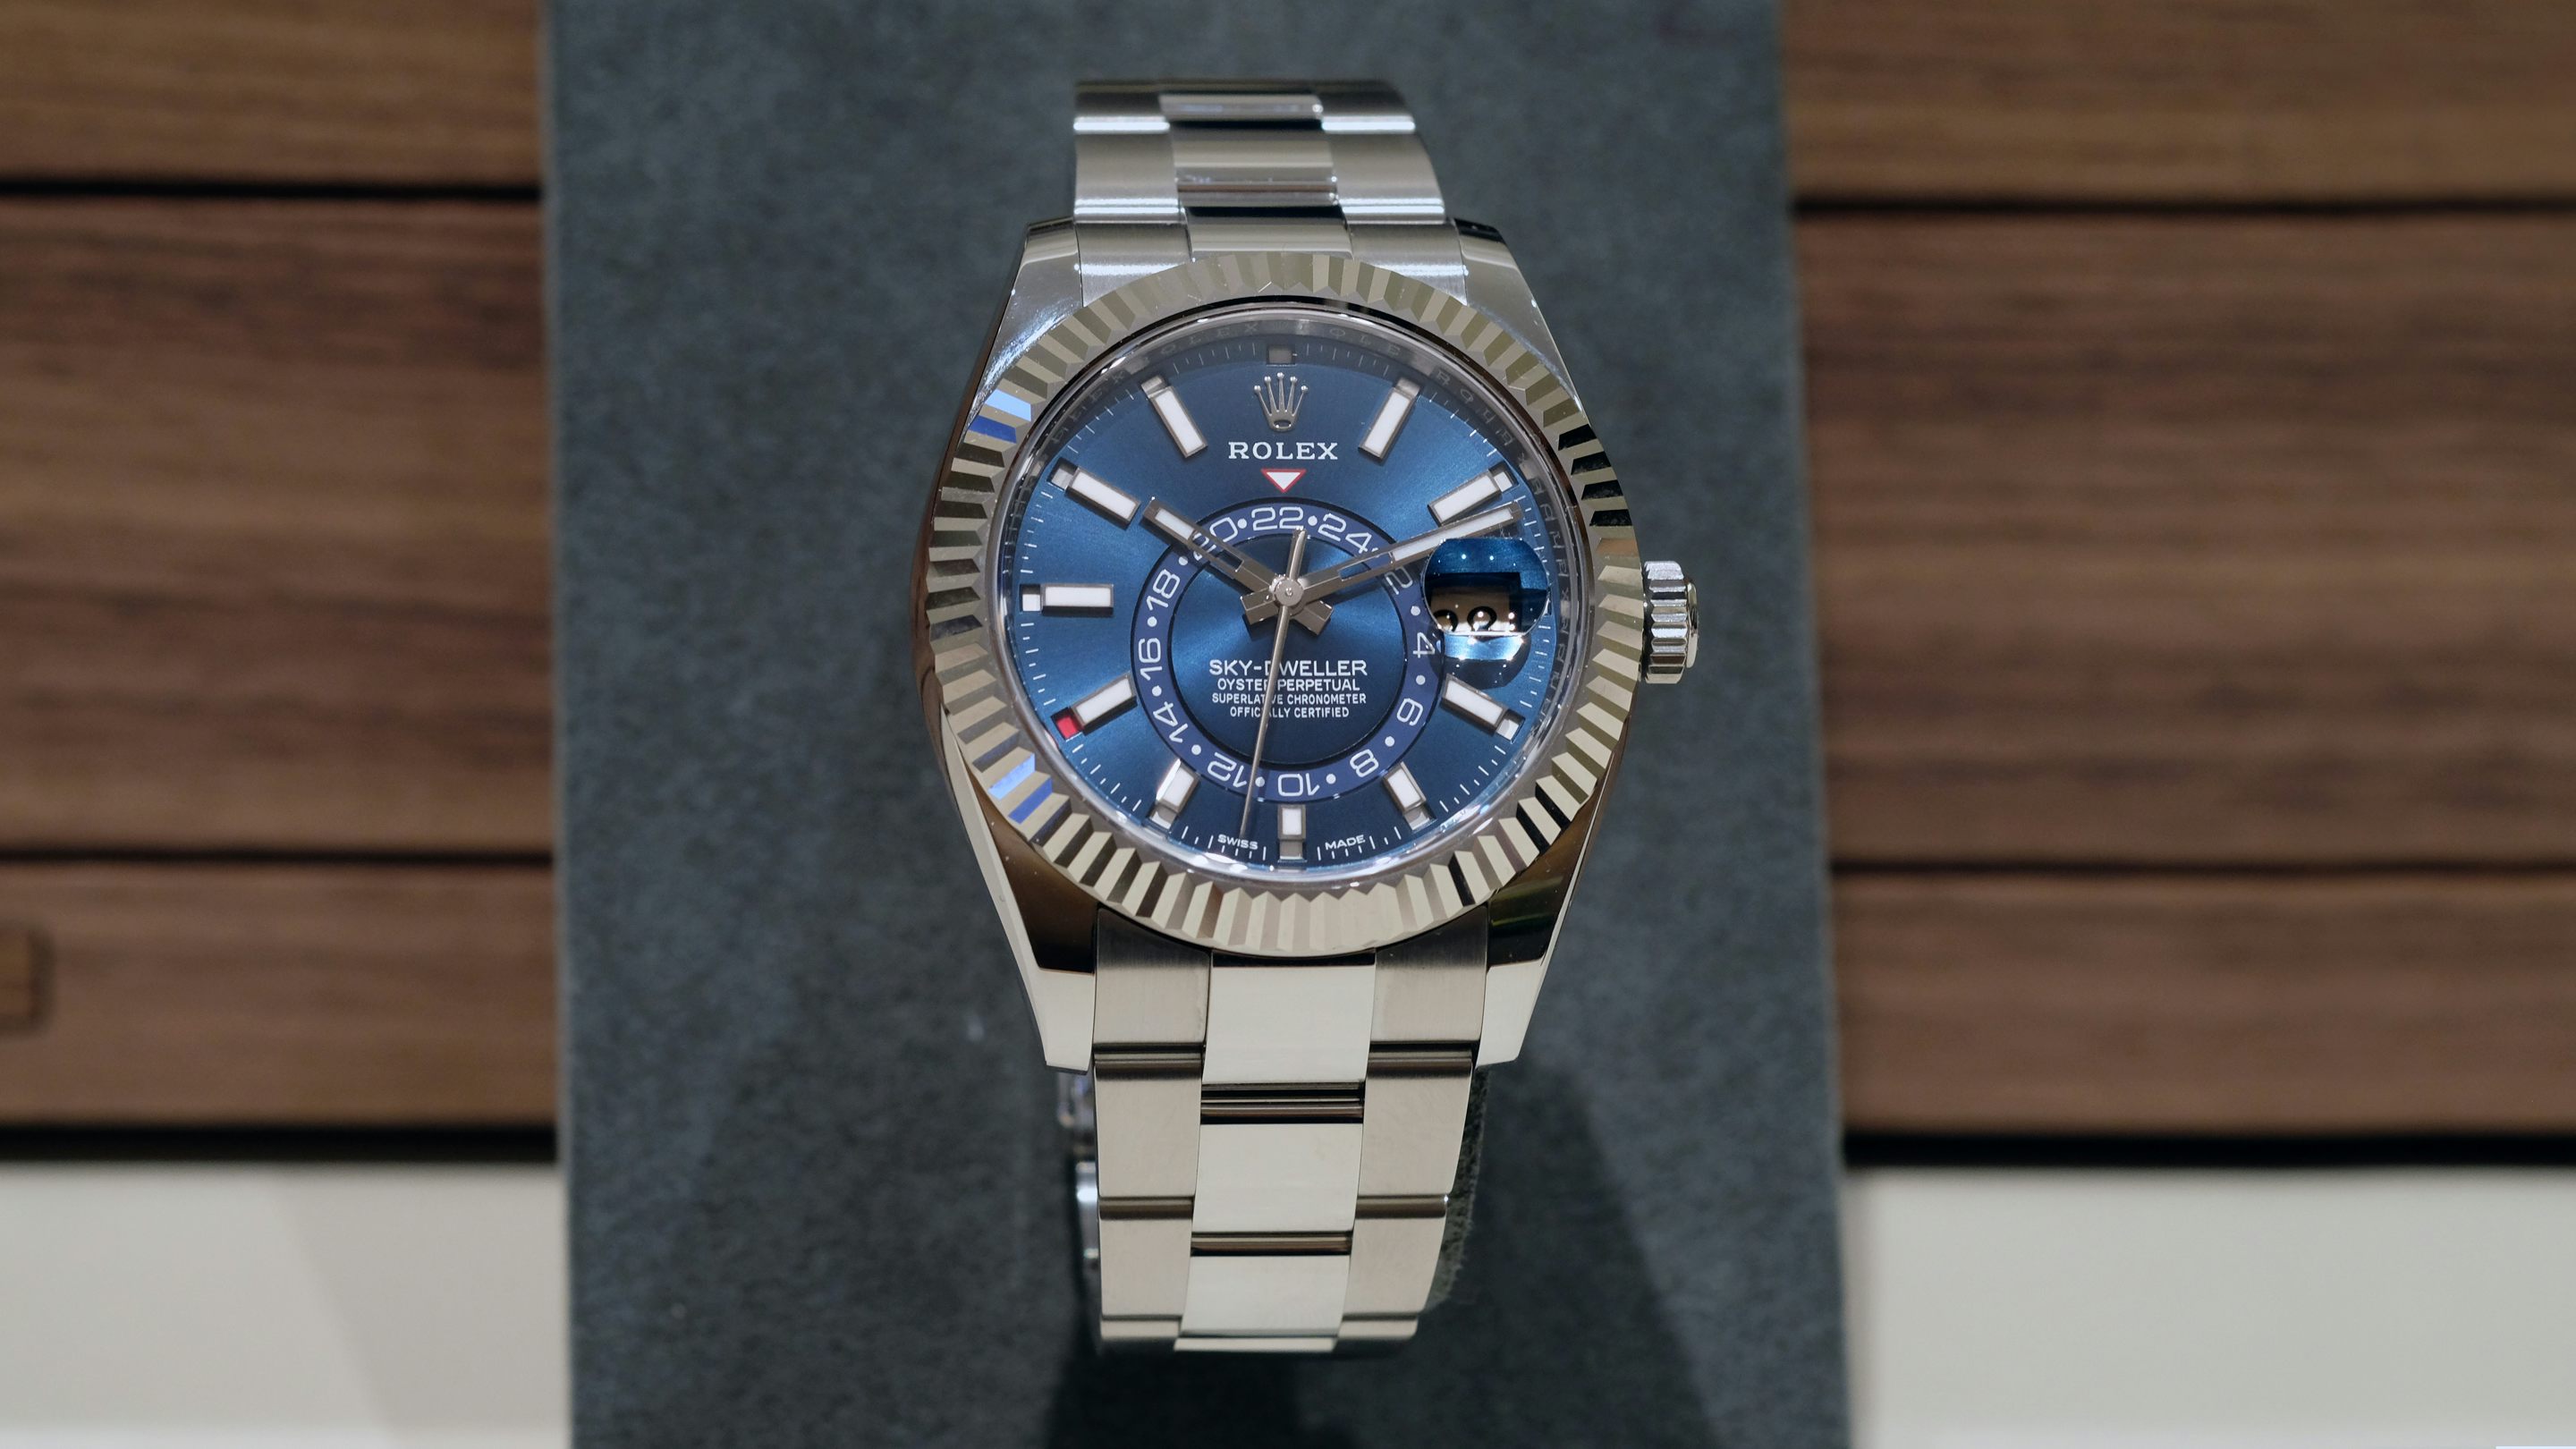 Introducing: The Rolex Sky-Dweller Ref. 326934 In Stainless Steel And In Two-Tone (Live Pics Pricing) - Hodinkee